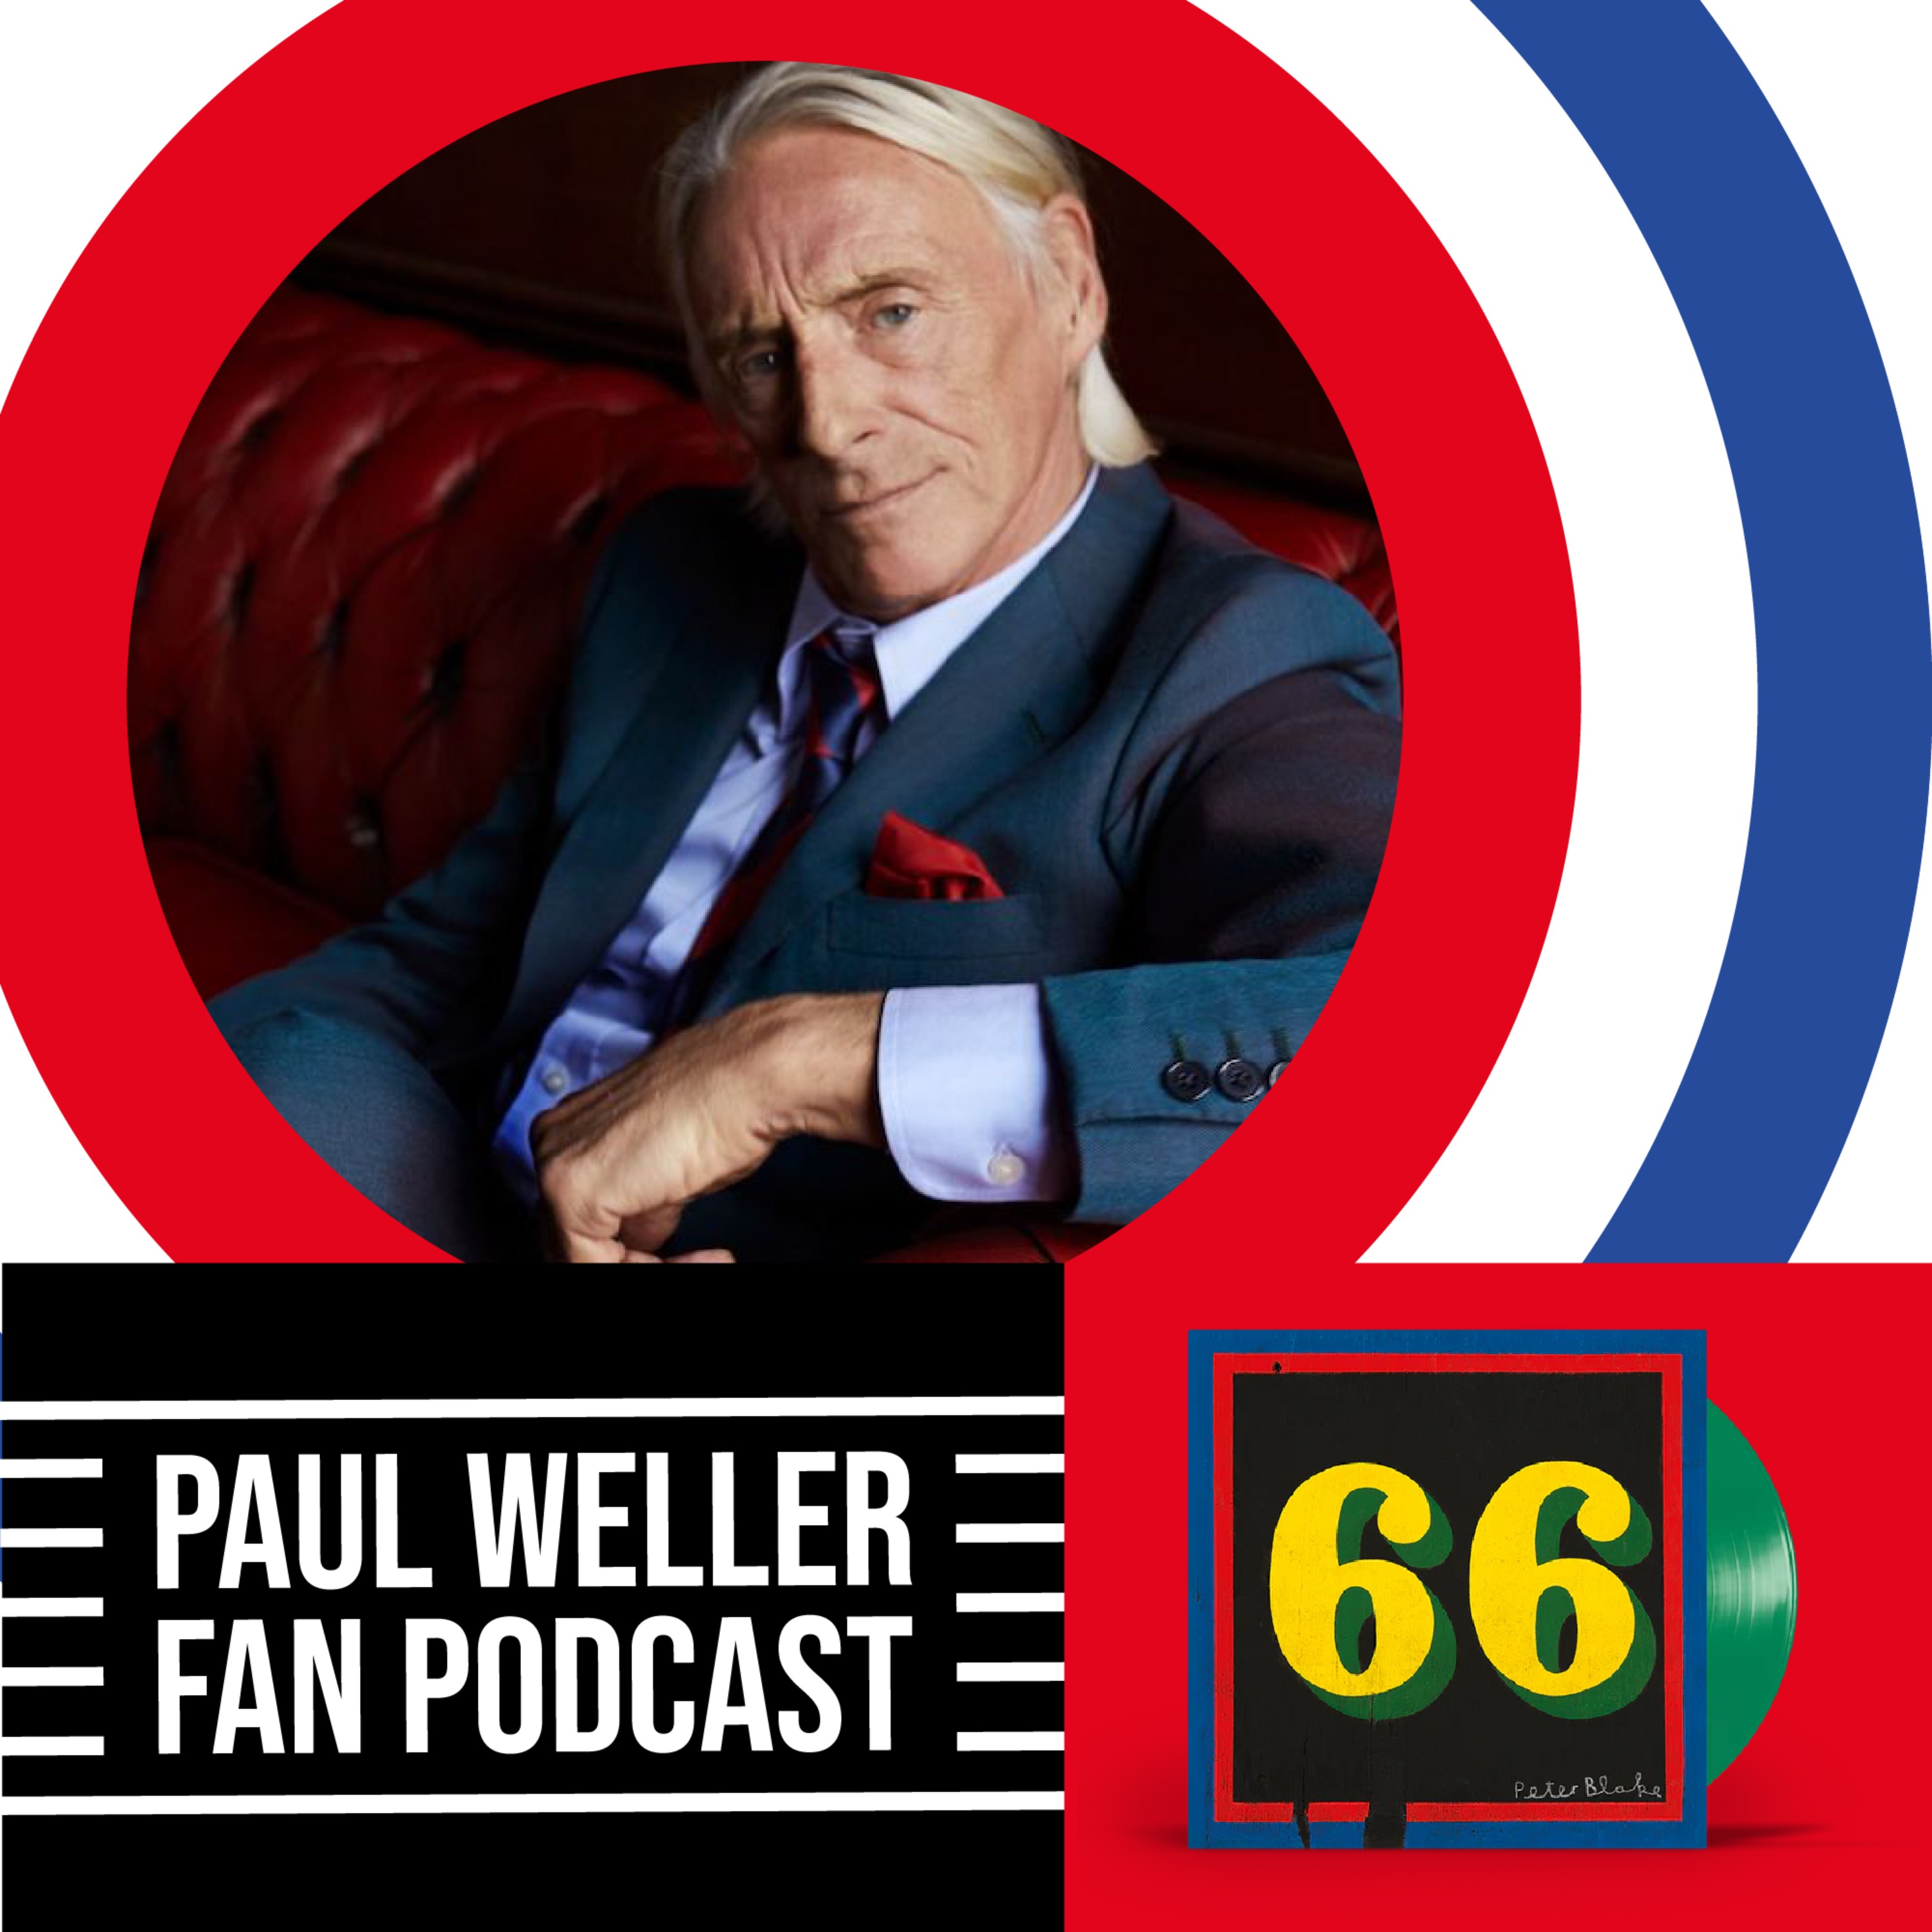 Paul Weller Interview - The Story of 66